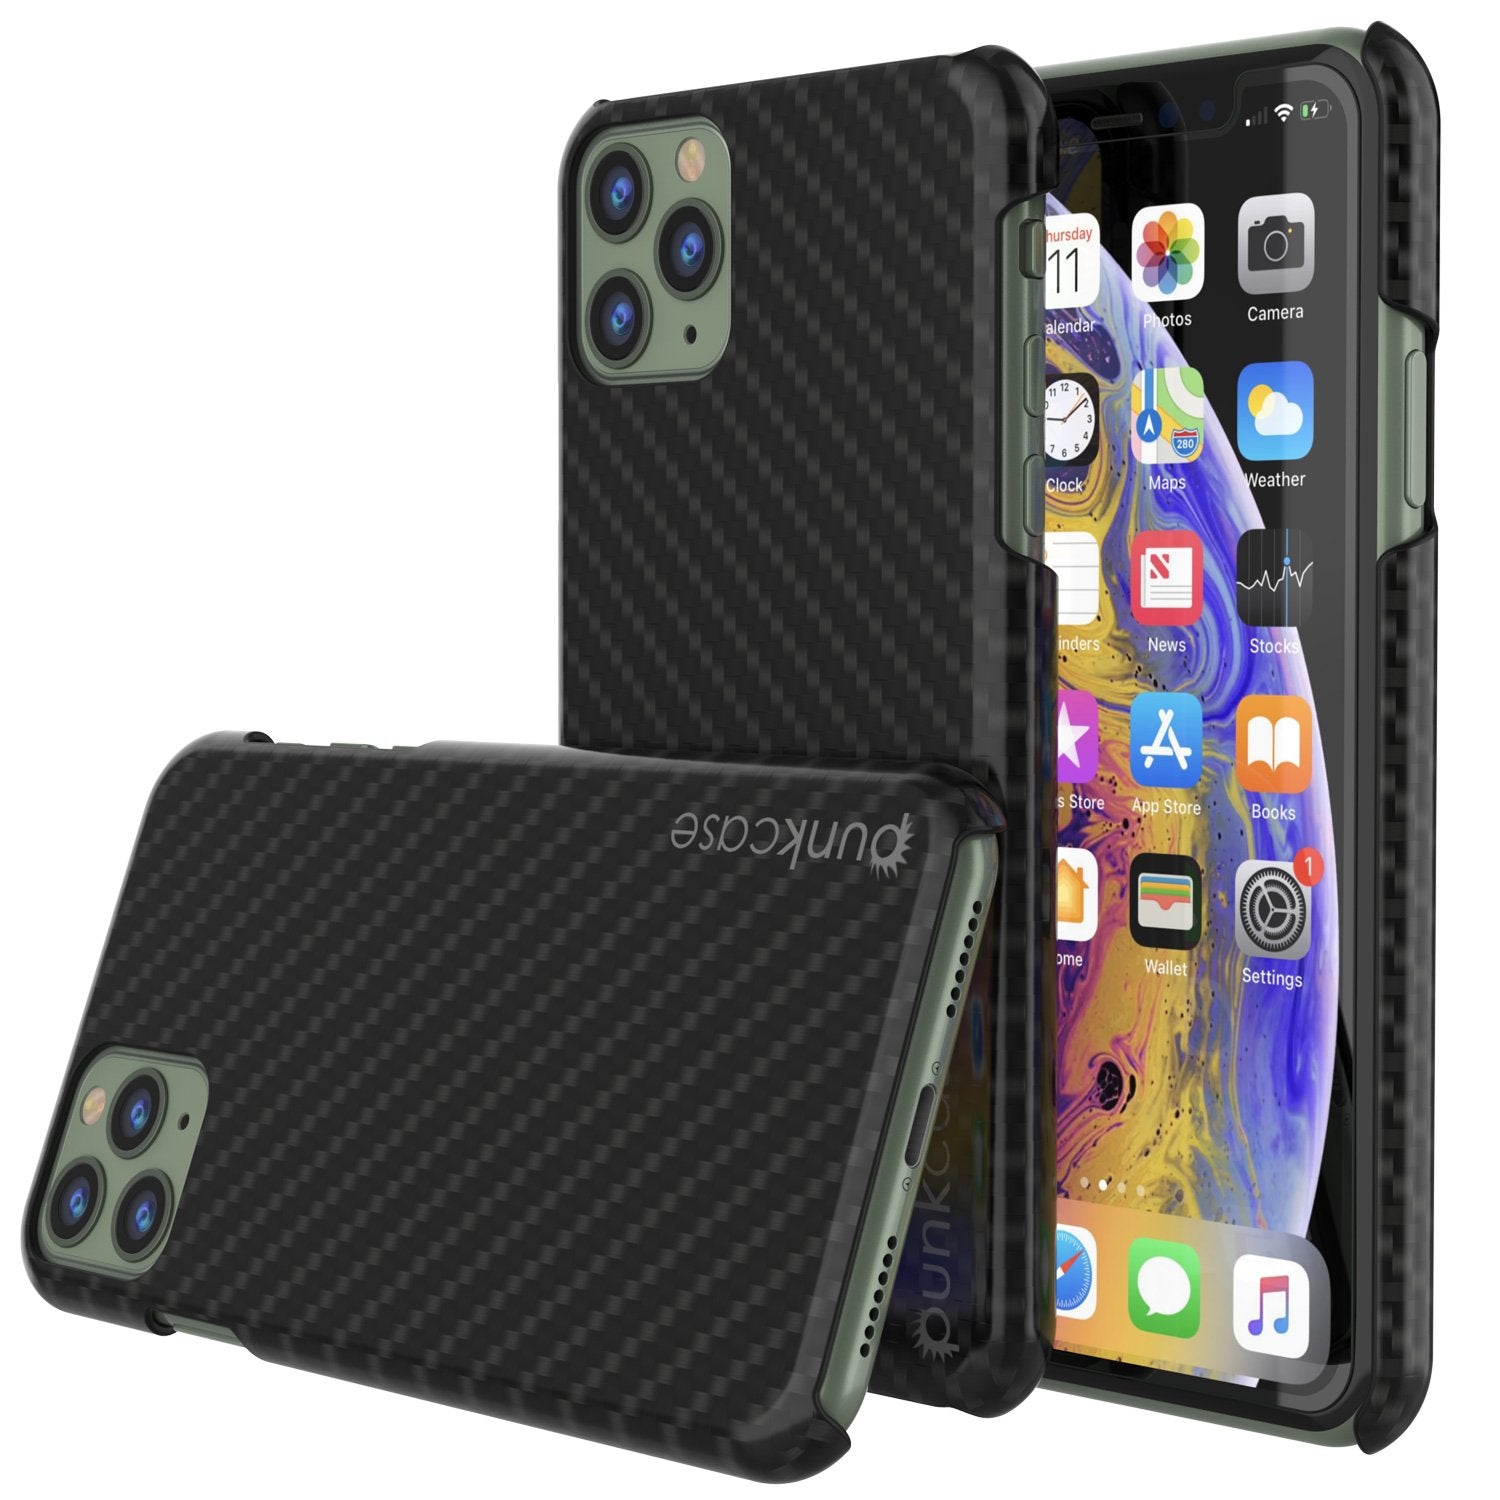 iPhone 11 Pro Max Case, Punkcase CarbonShield, Heavy Duty & Ultra Thin 2 Piece Dual Layer [shockproof]